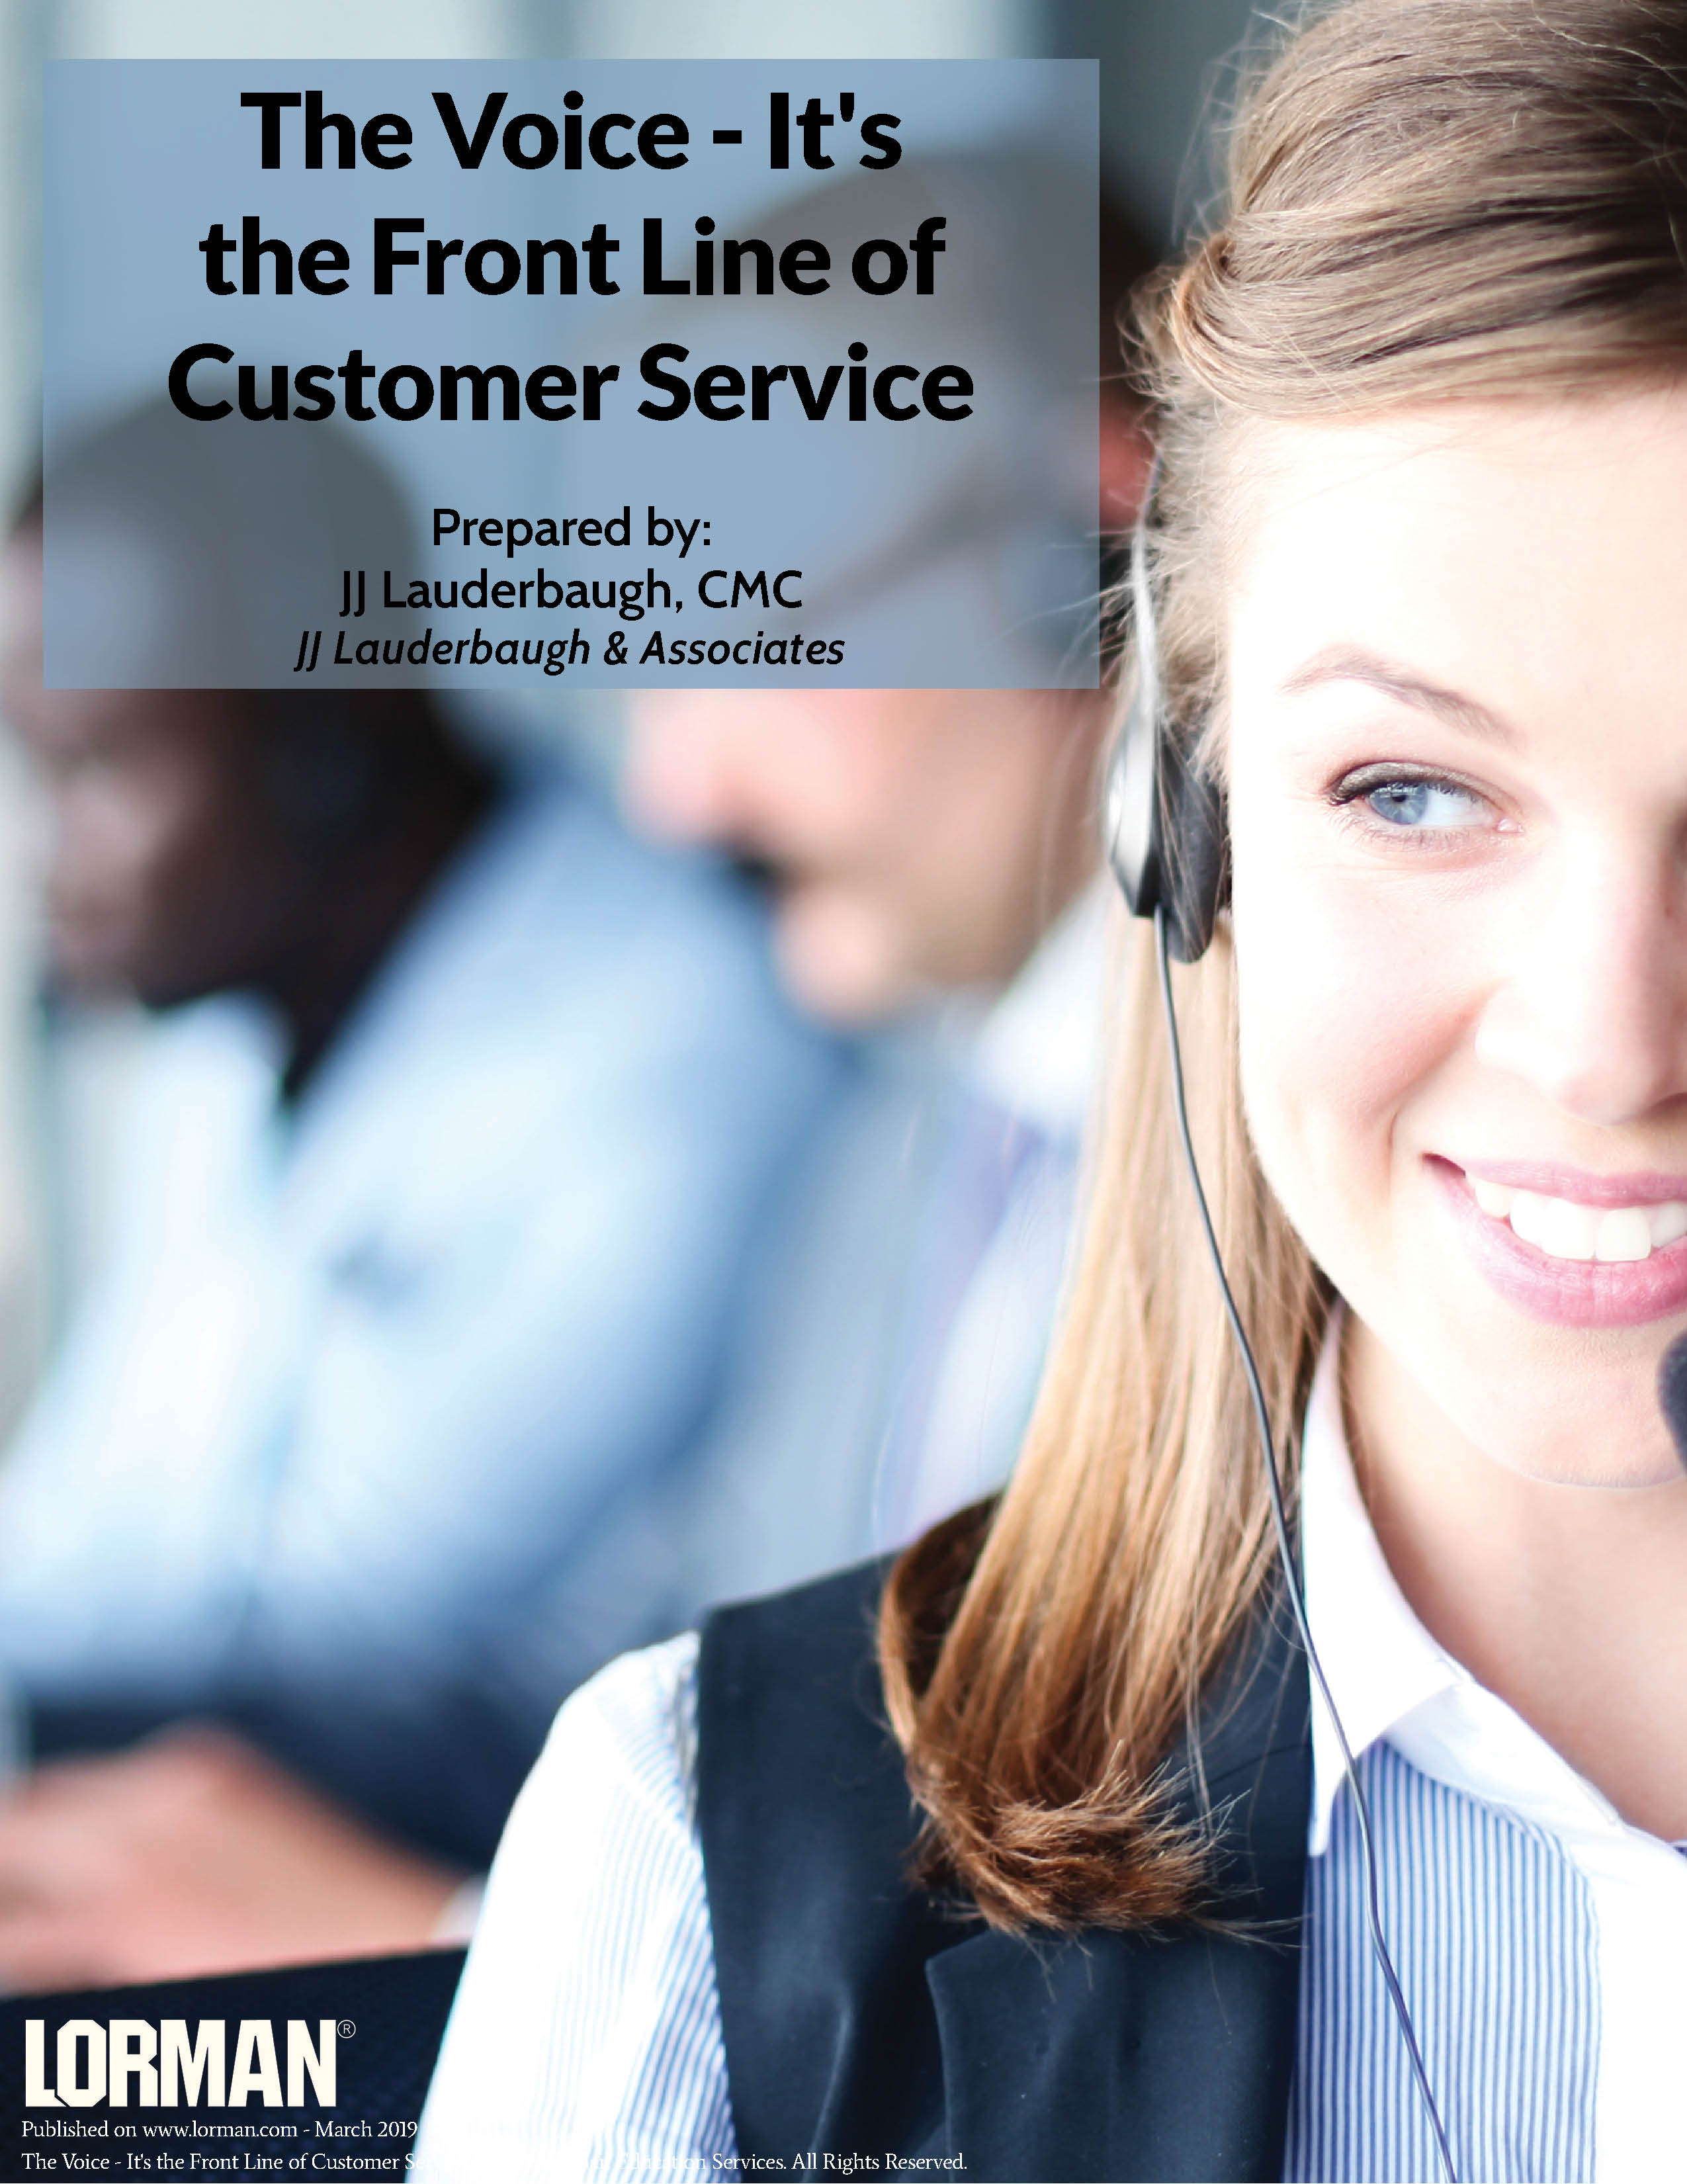 The Voice - It's the Front Line of Customer Service